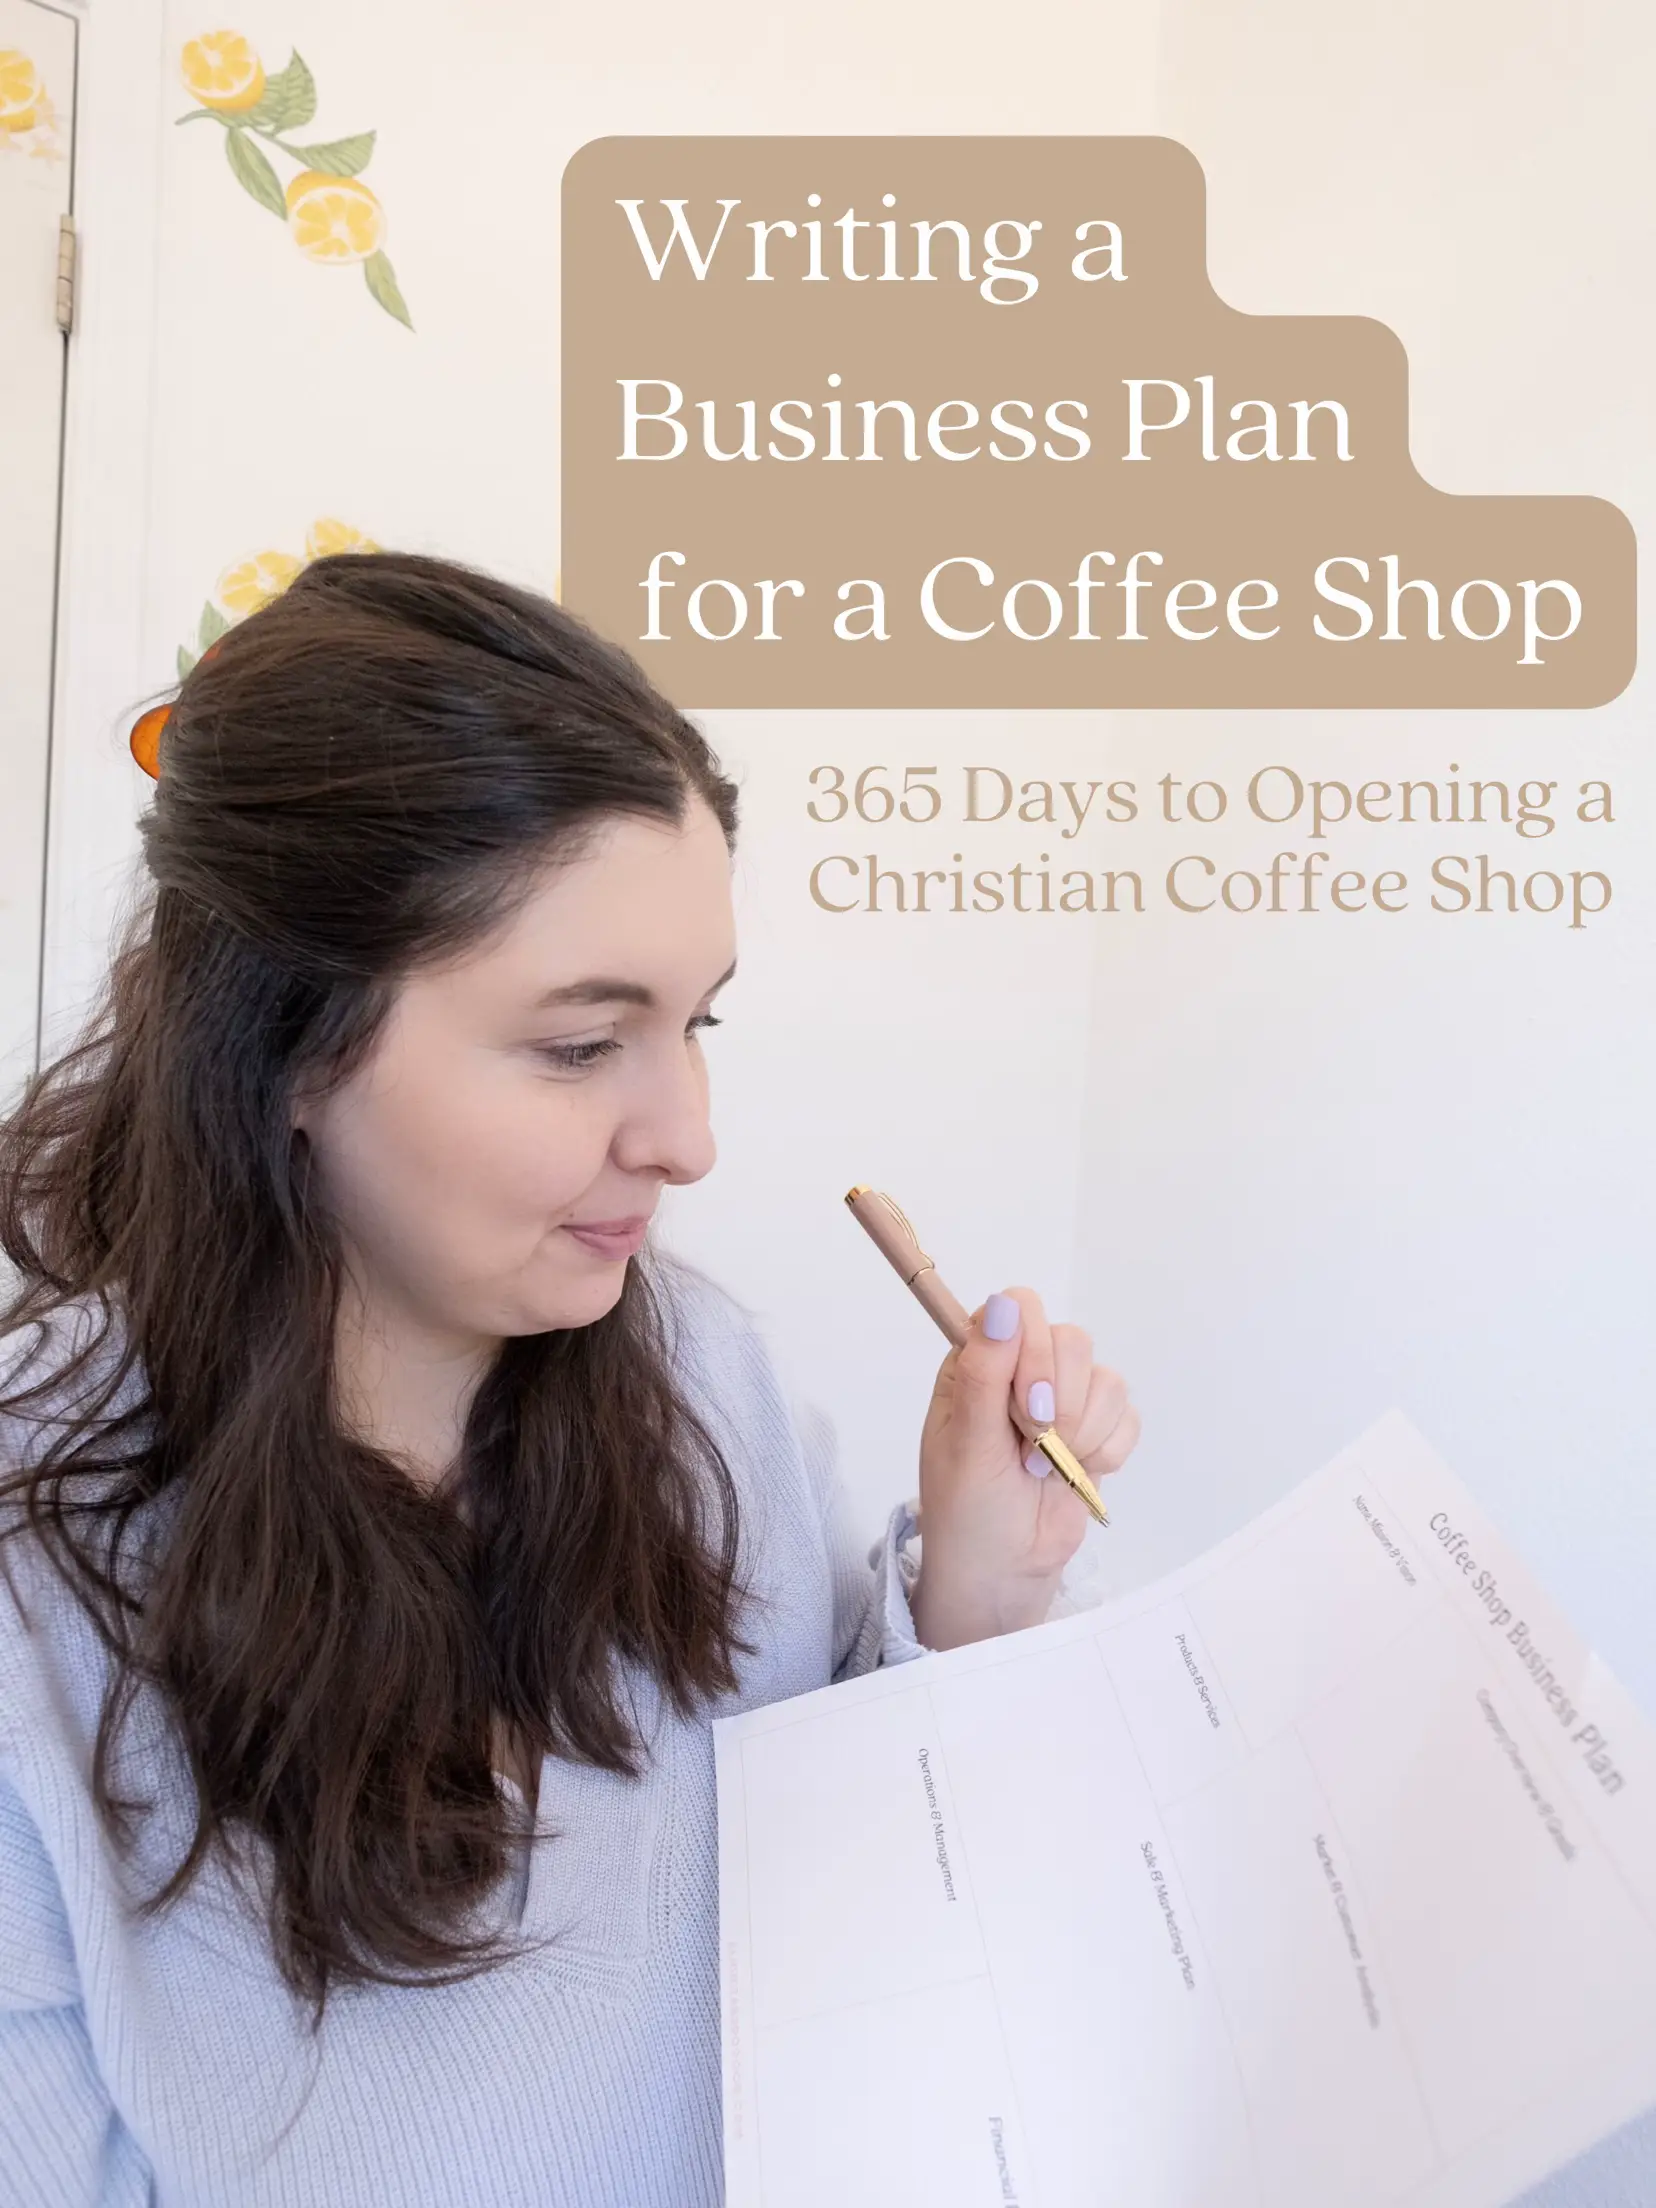  A woman is writing a business plan for a coffee shop.